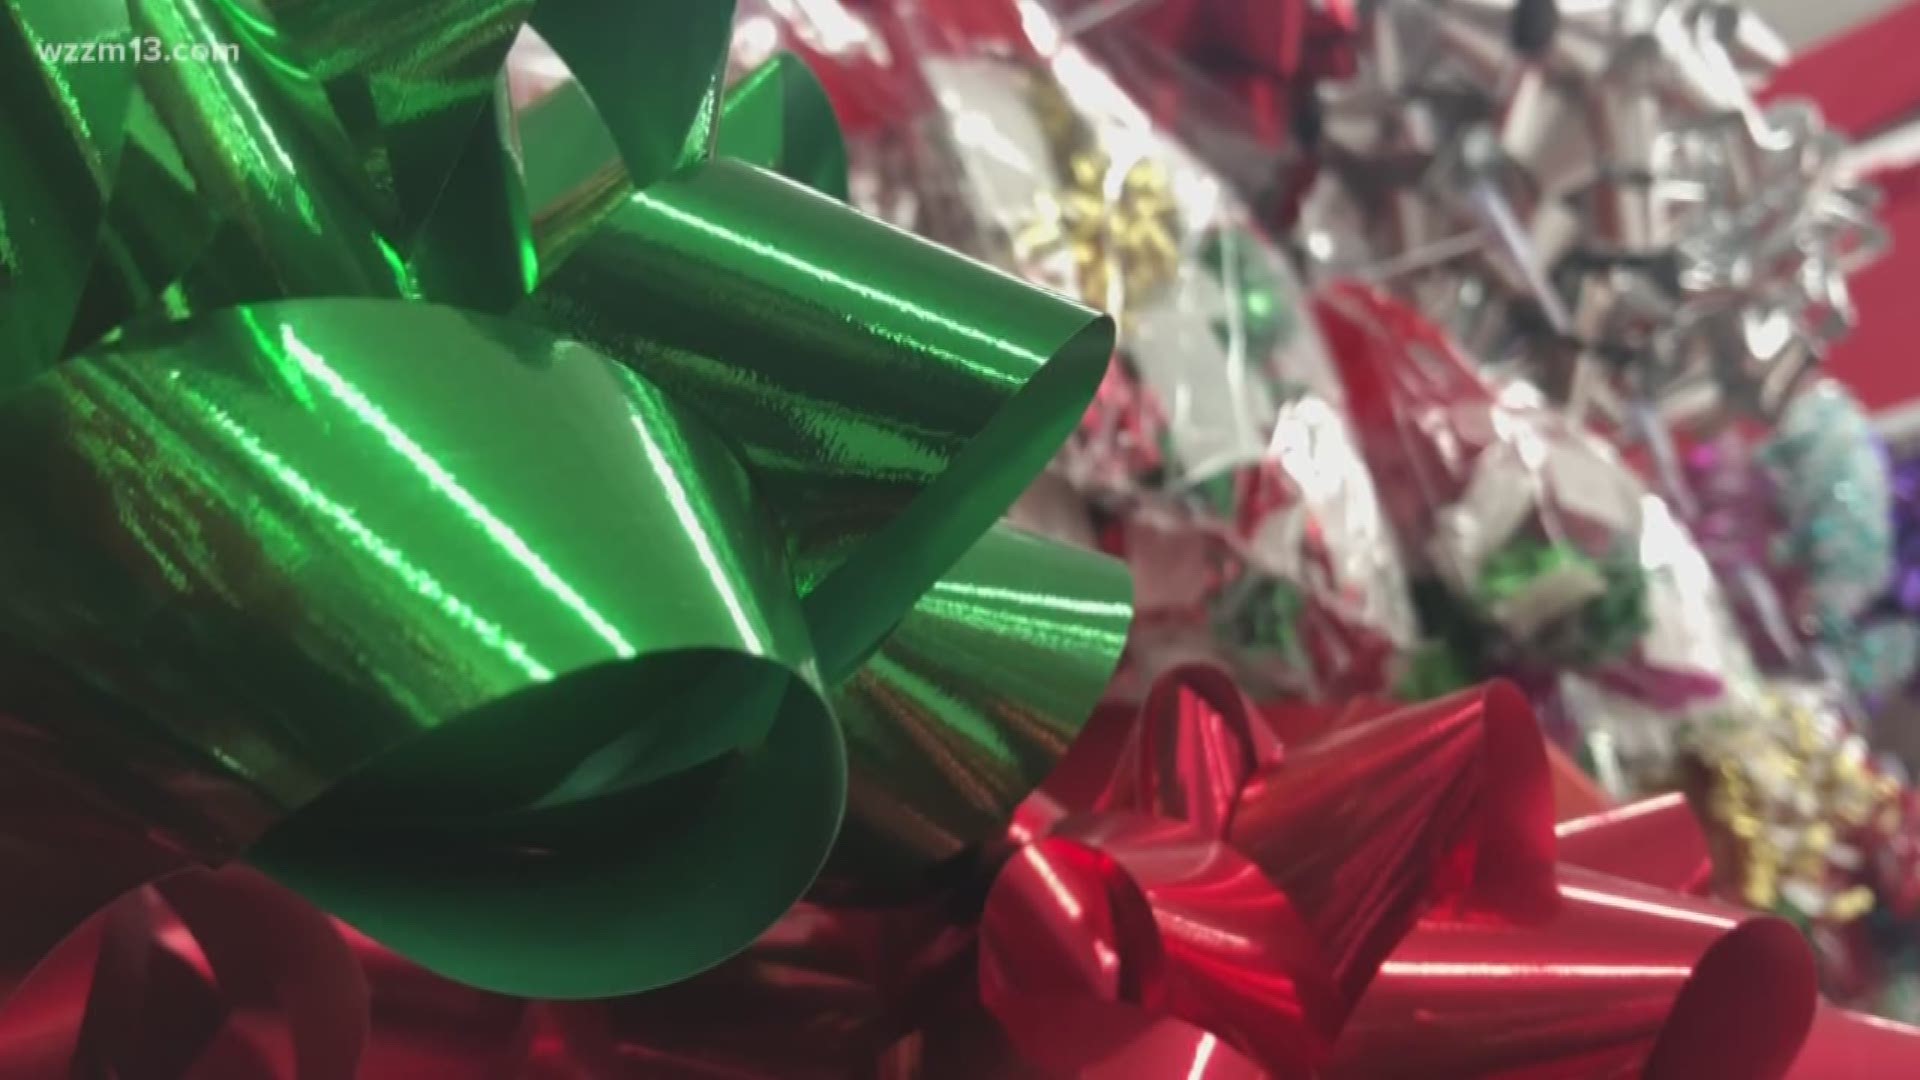 What can recycle at Christmas time?